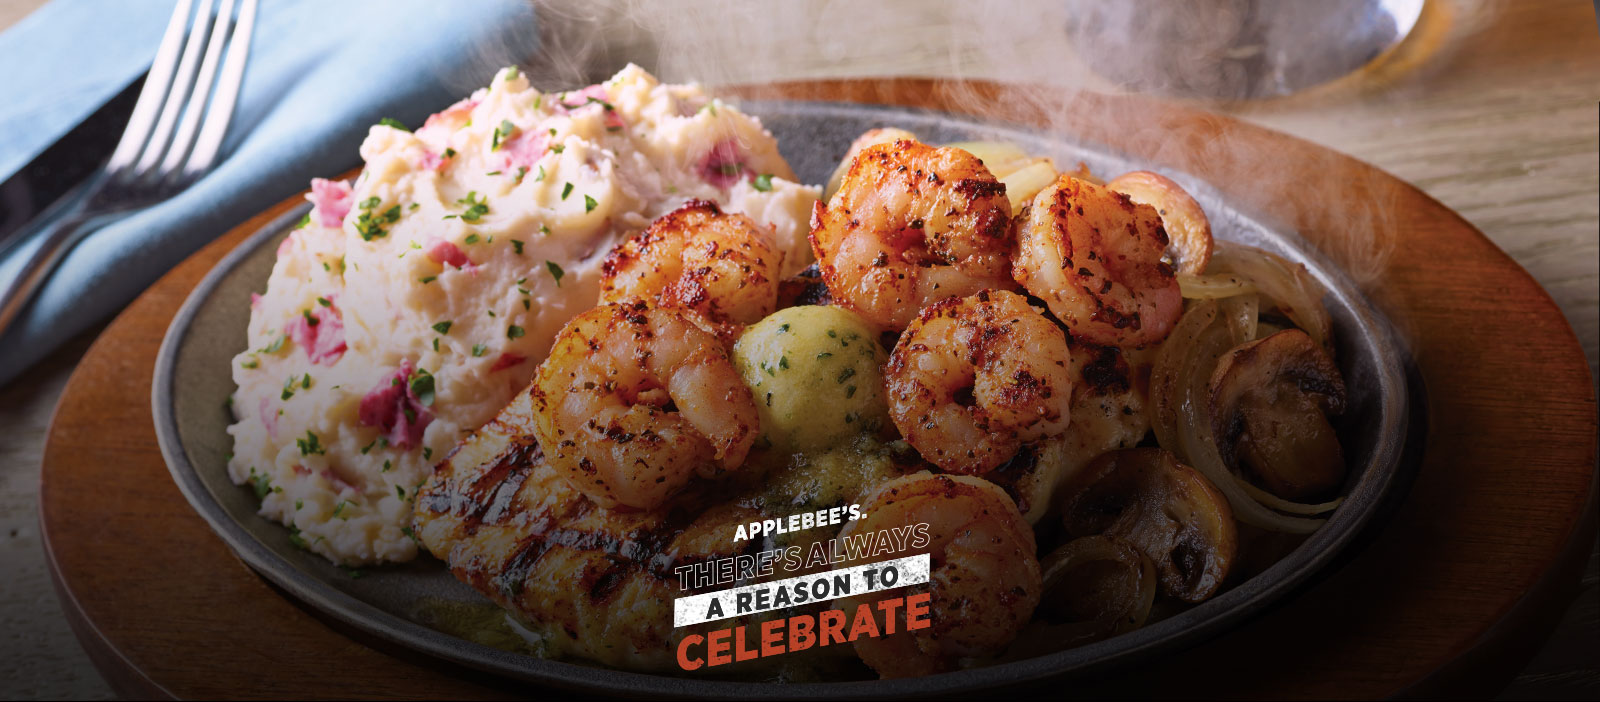 There's Always A Reason To Celebrate - Applebee's Grill and Bar Niagara Falls